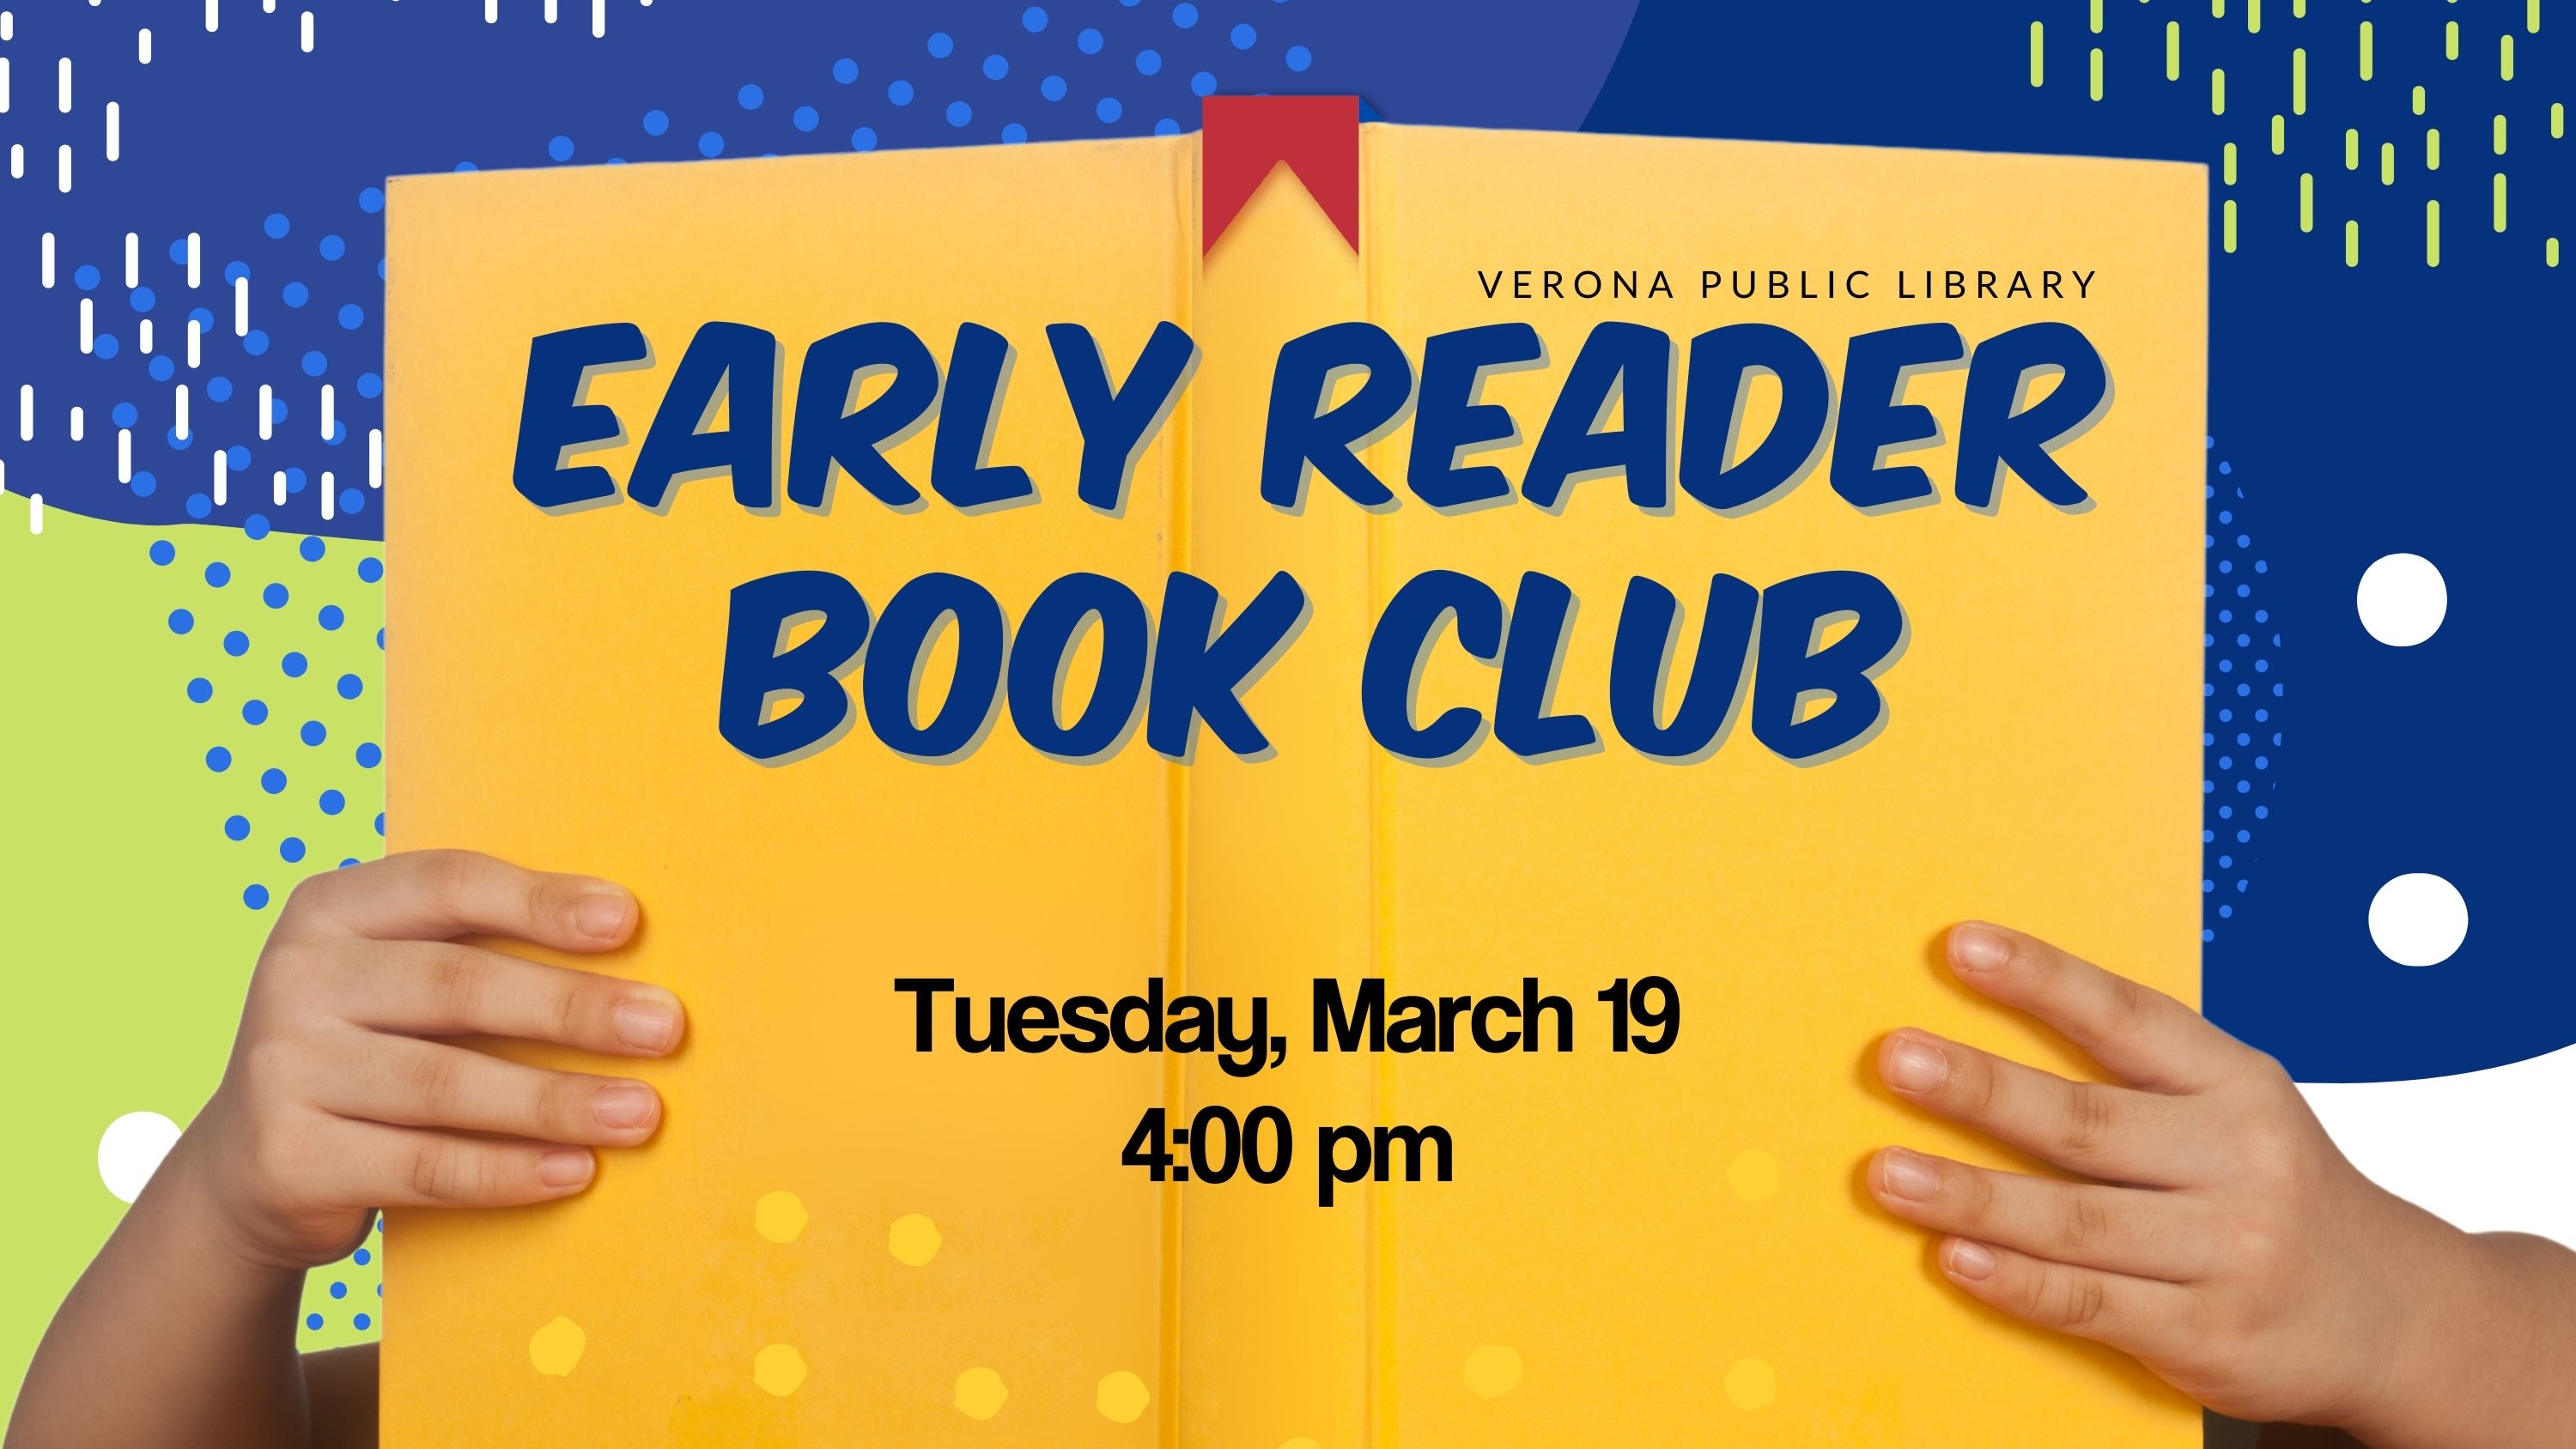 Early Reader Book Club; Tuesday, March 19 at 4:00 pm